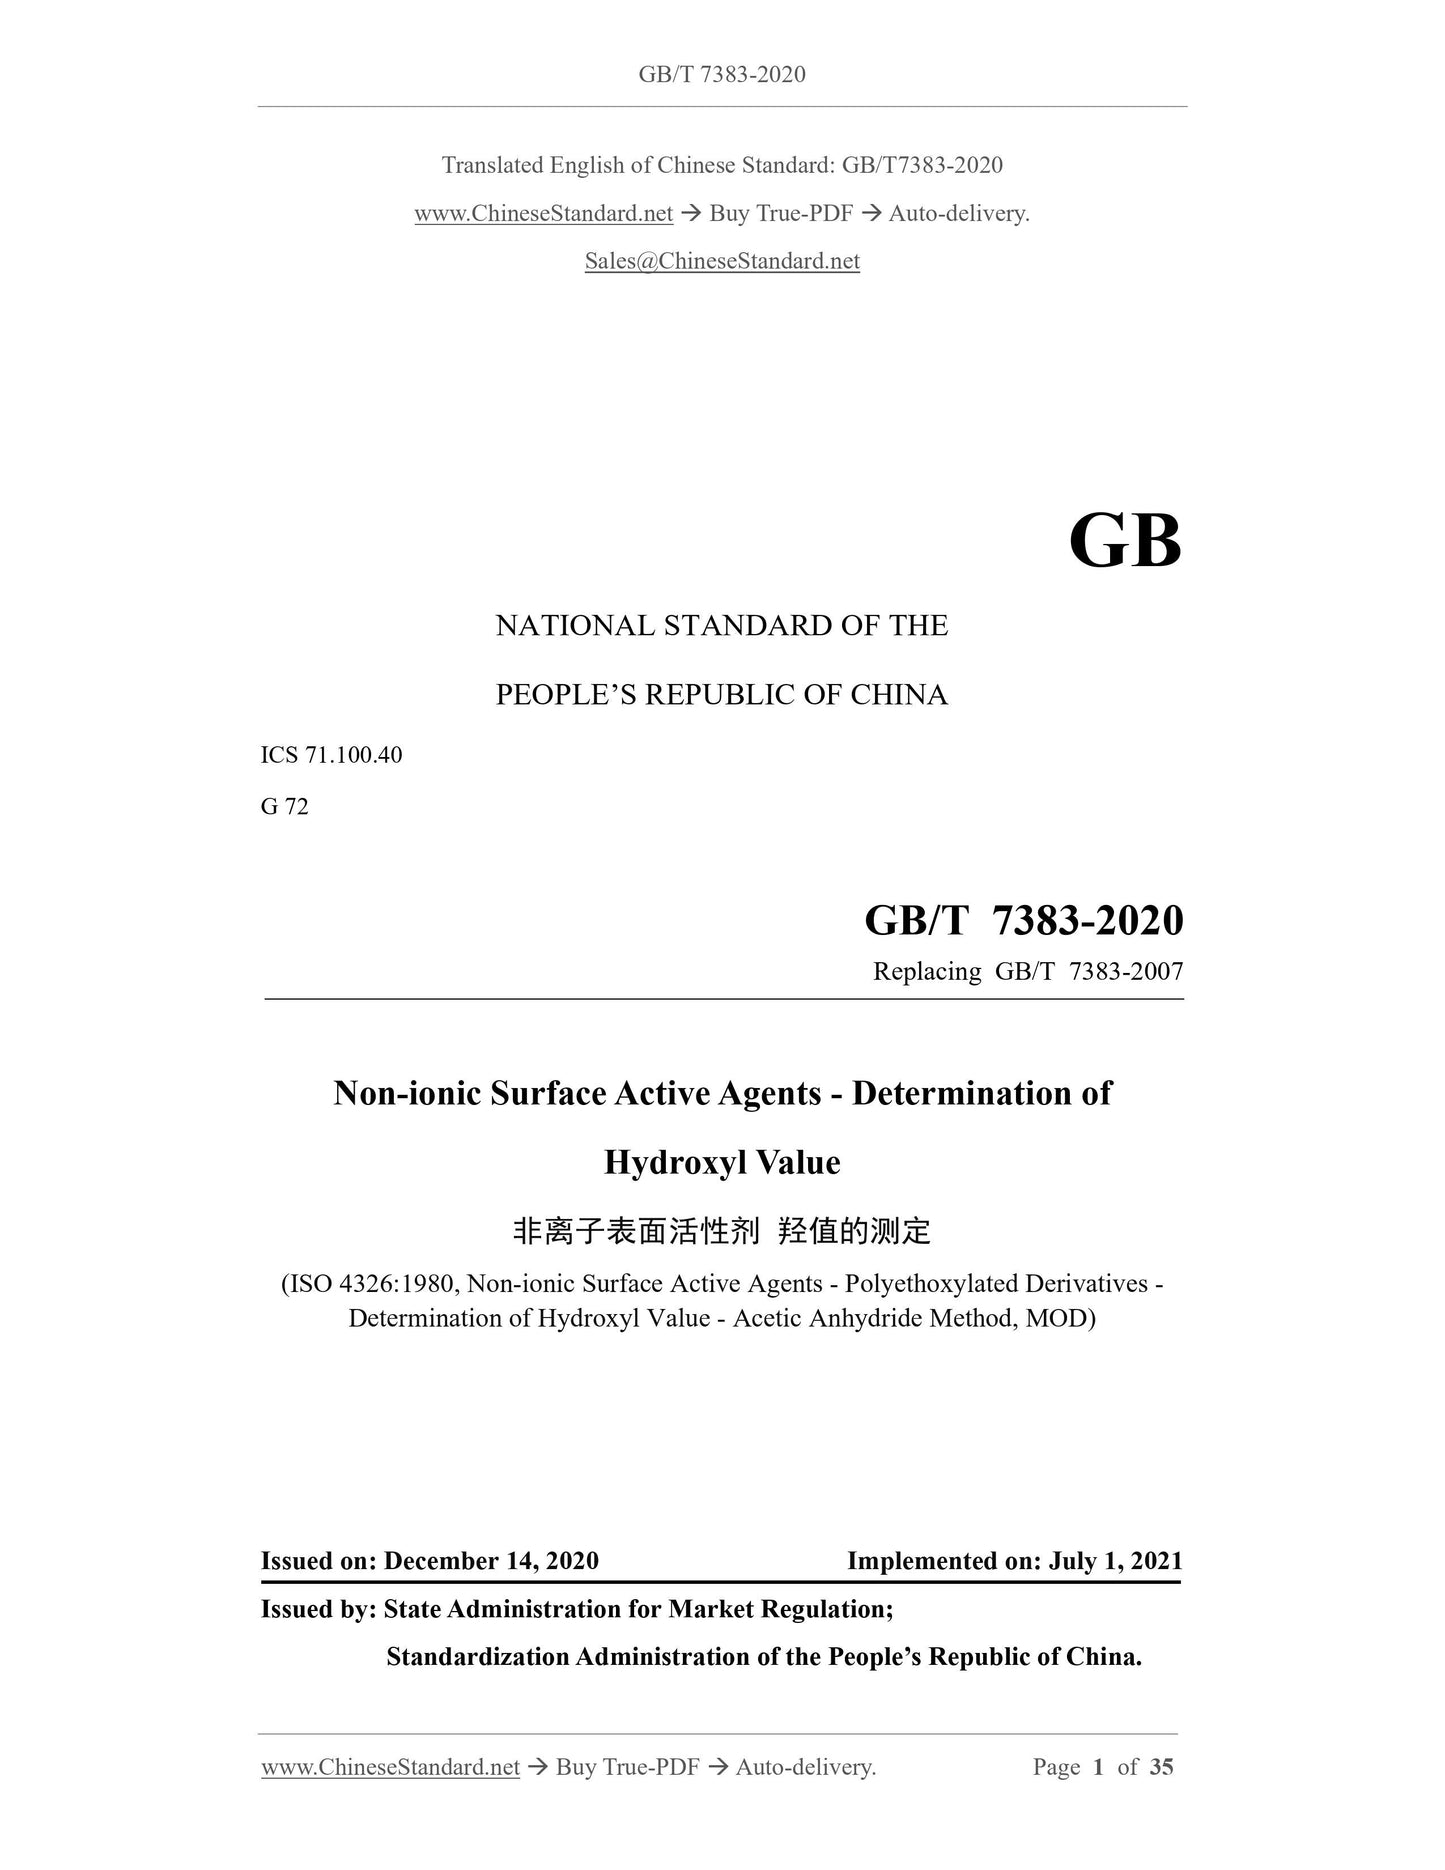 GB/T 7383-2020 Page 1